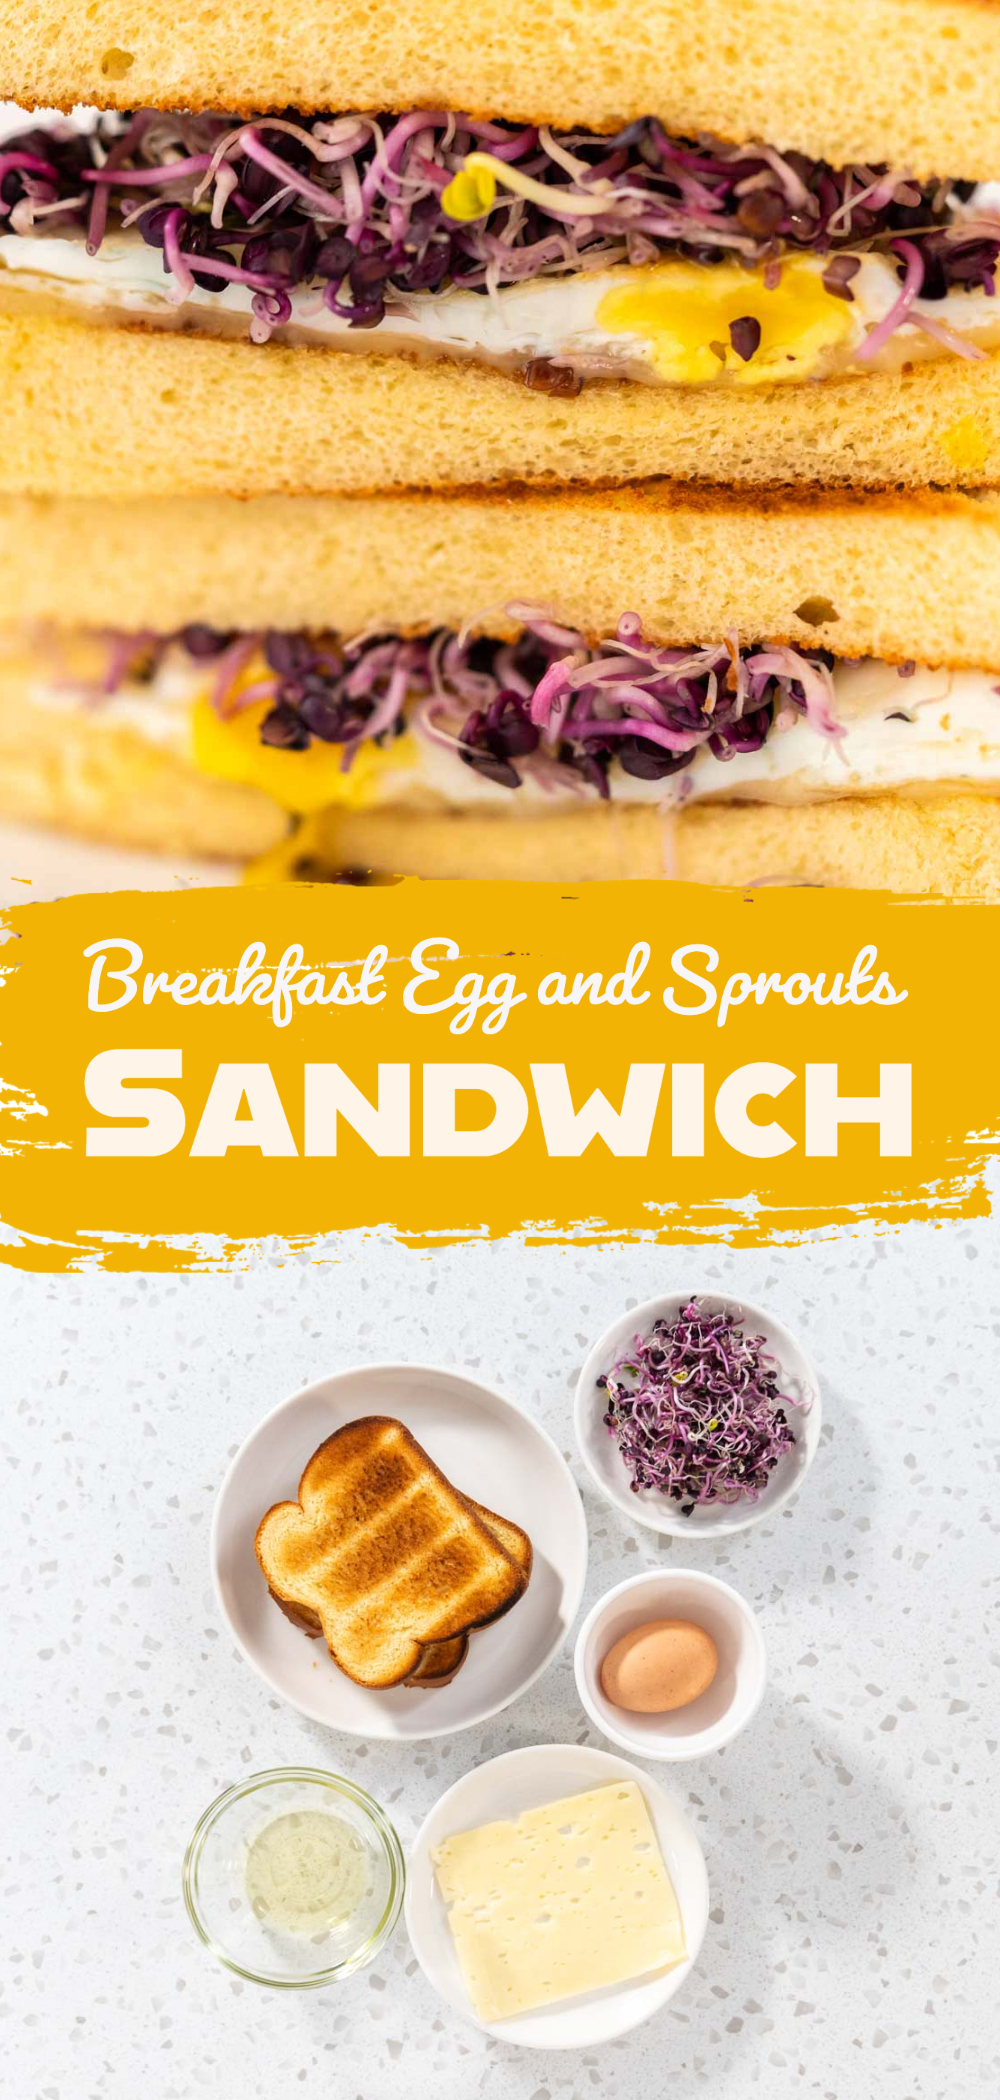 Breakfast Egg and Sprouts Sandwich